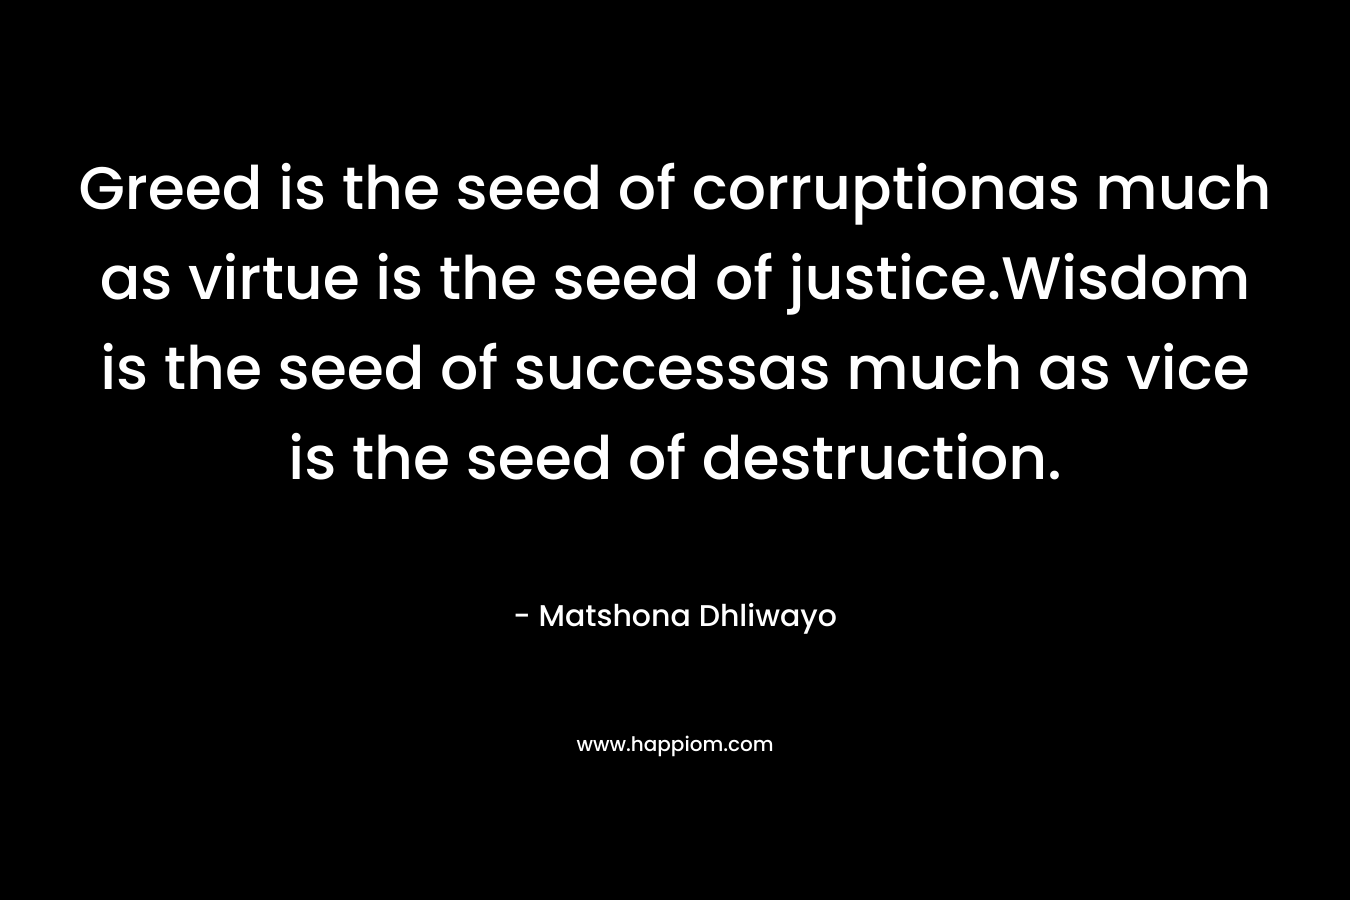 Greed is the seed of corruptionas much as virtue is the seed of justice.Wisdom is the seed of successas much as vice is the seed of destruction.